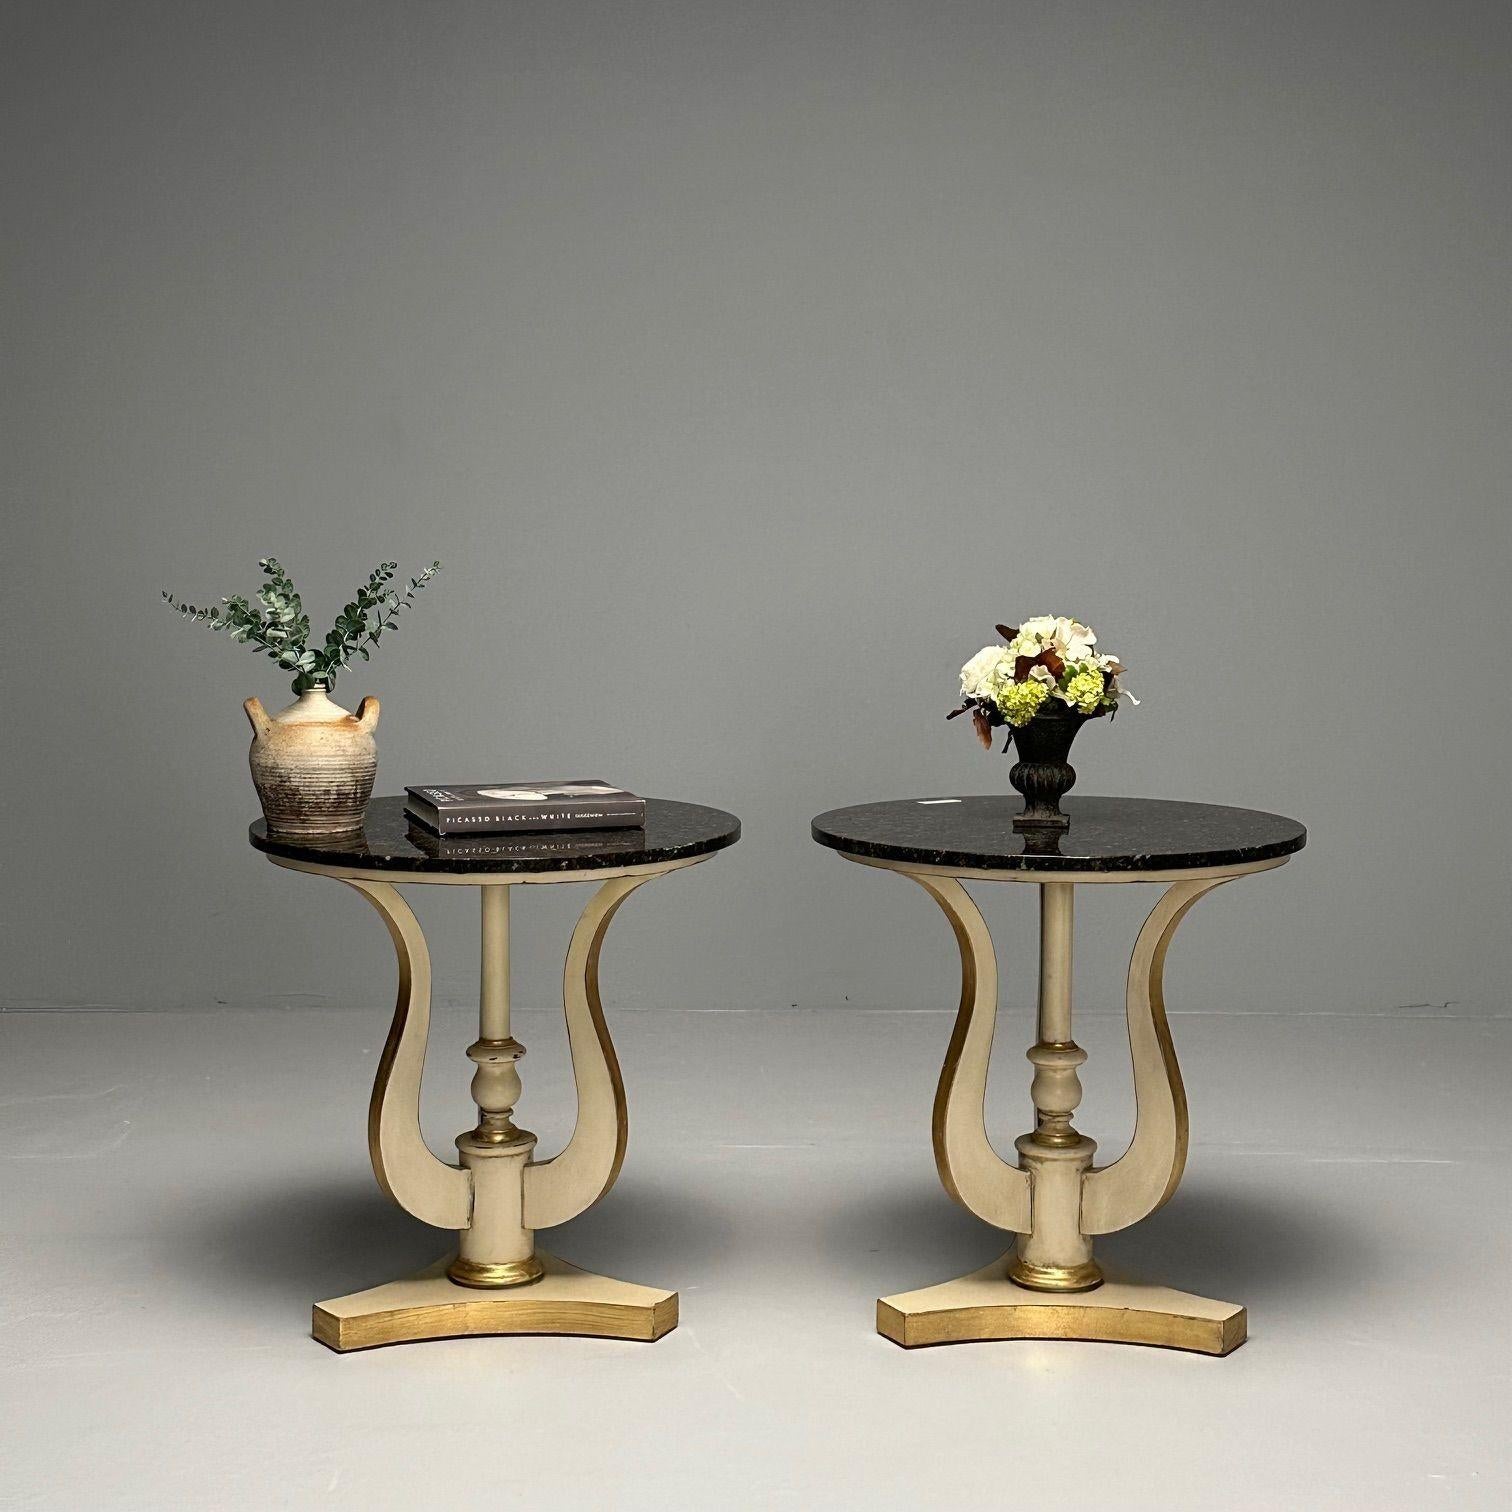 Regency, Side Tables or Pedestals, Ivory Paint, Giltwood, Marble Tops, USA, 1960s

An urn form tri pod pedestal base in parcel gilt and ivory paint decorated finish supporting a black marble top. A versatile pair of end tables, pedestal tables or